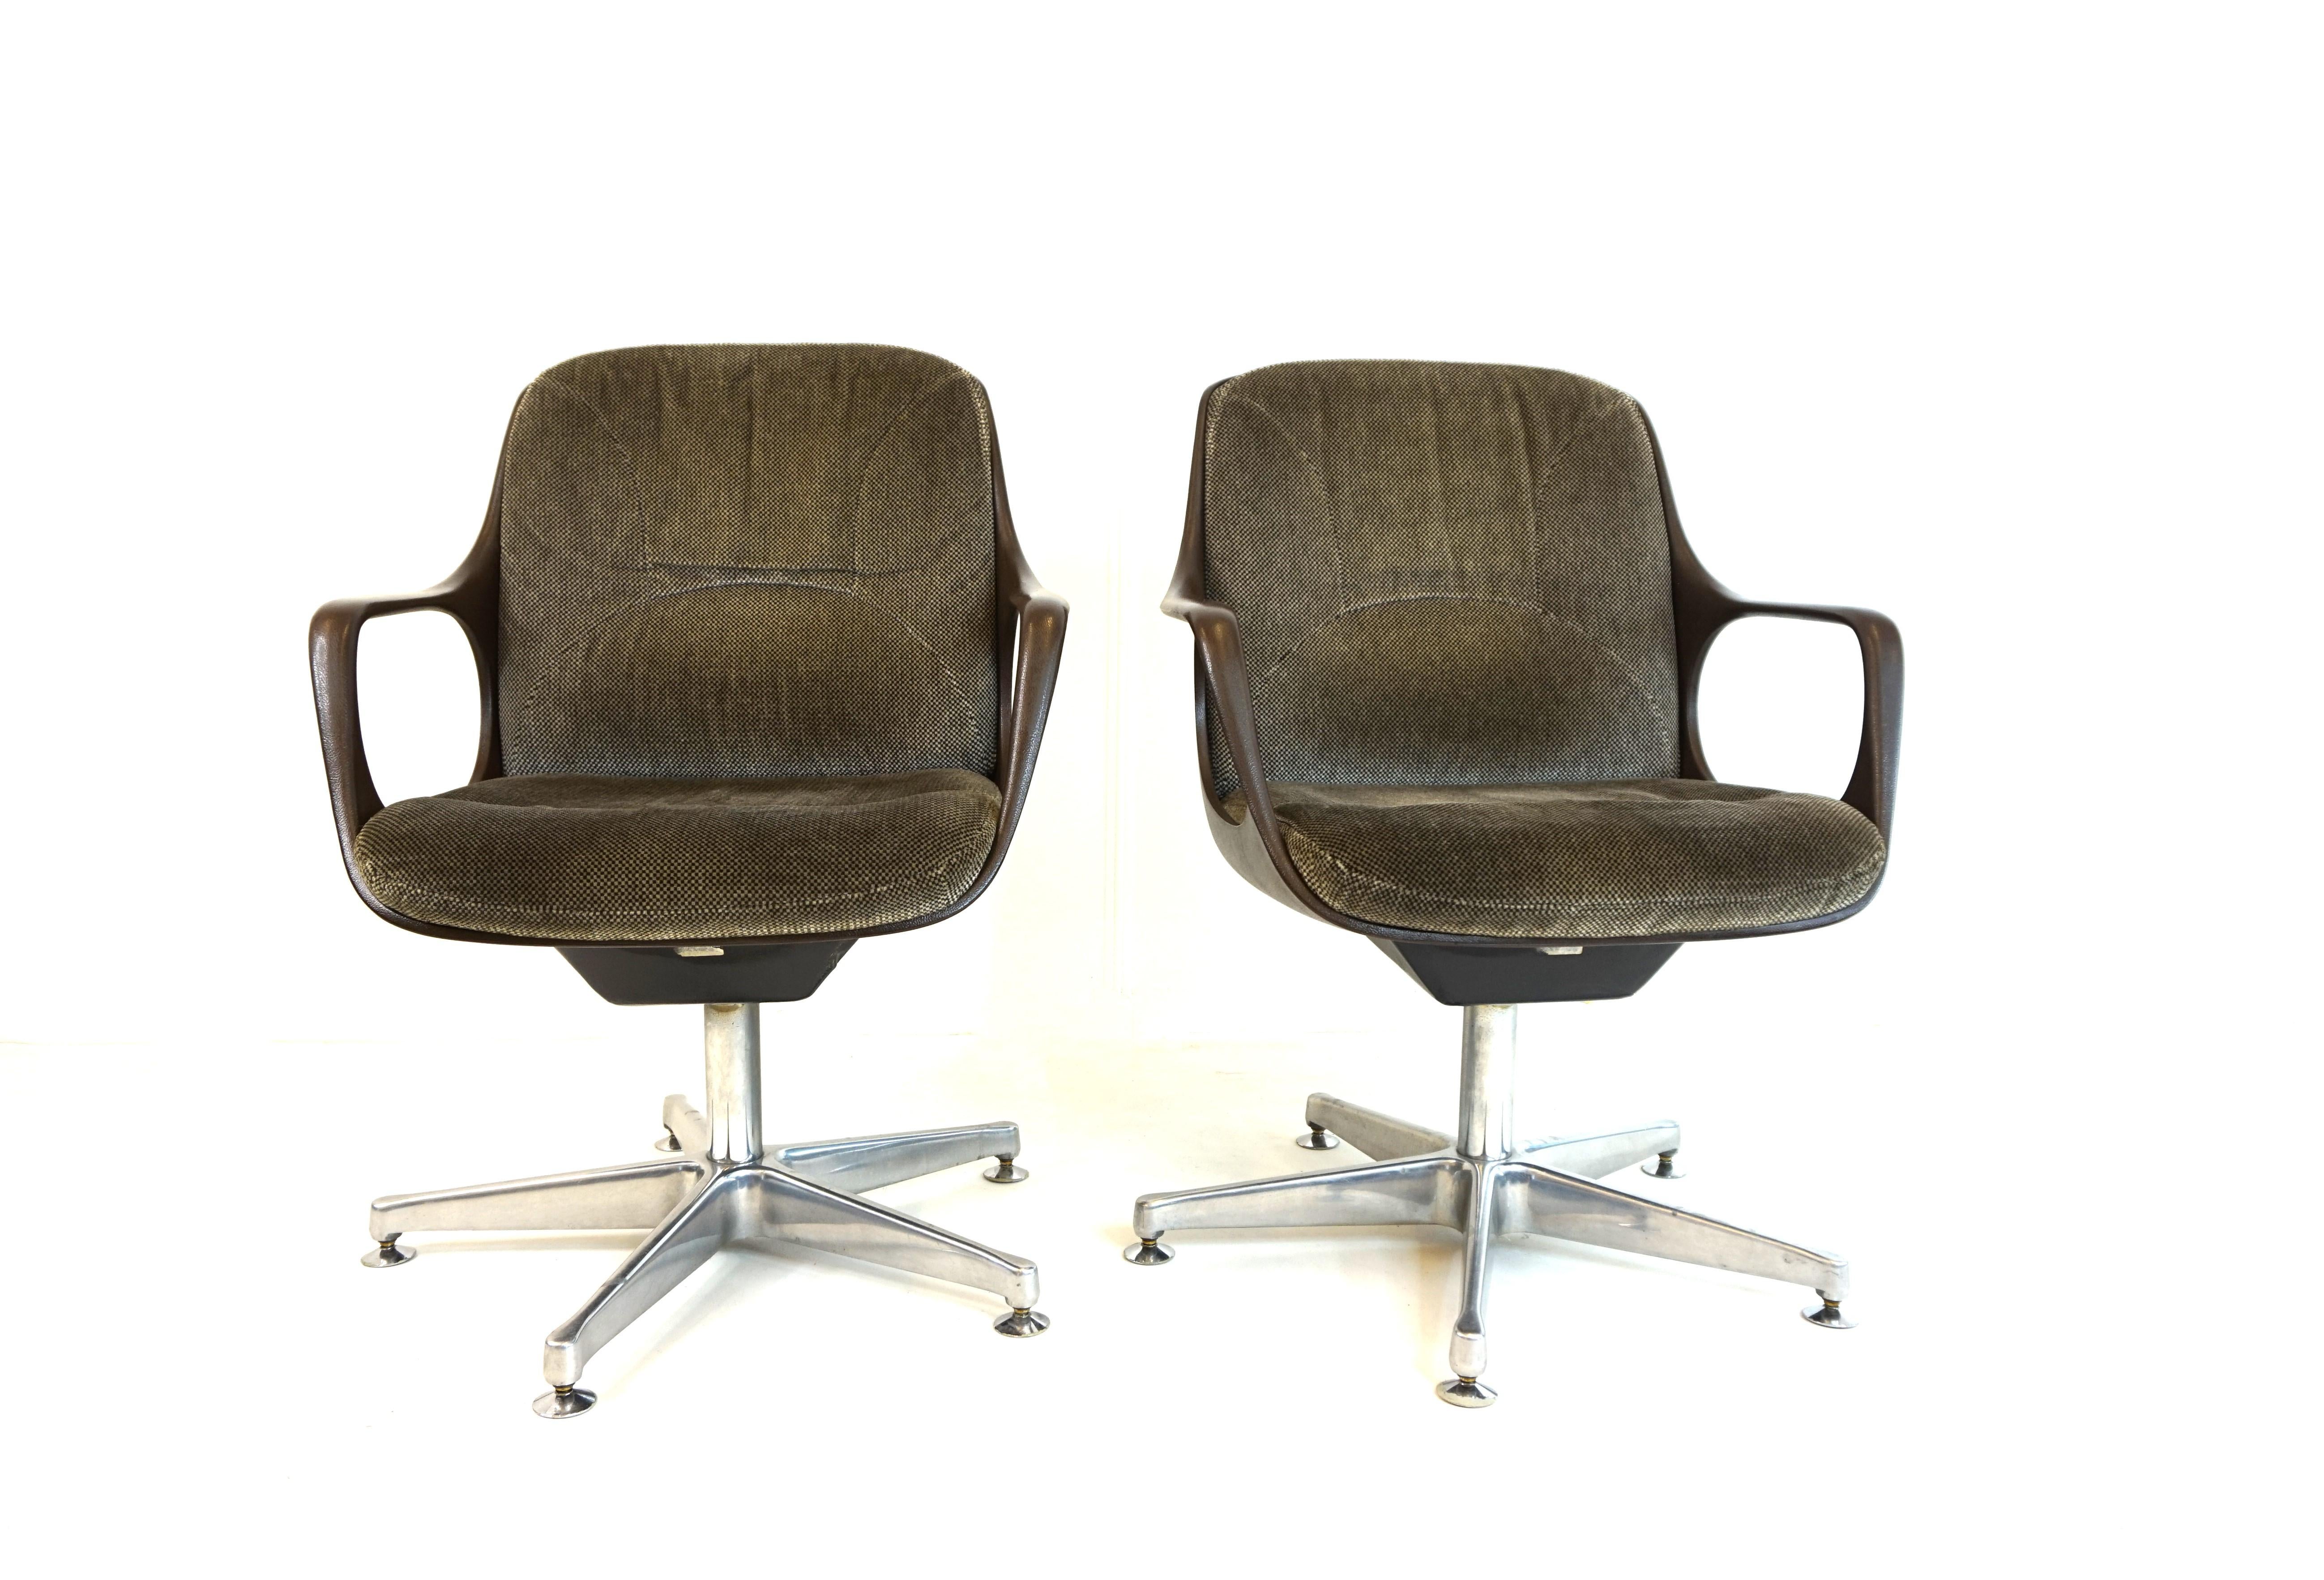 Chromcraft Set of 2 Space Age Office/Dining Room Chairs 4